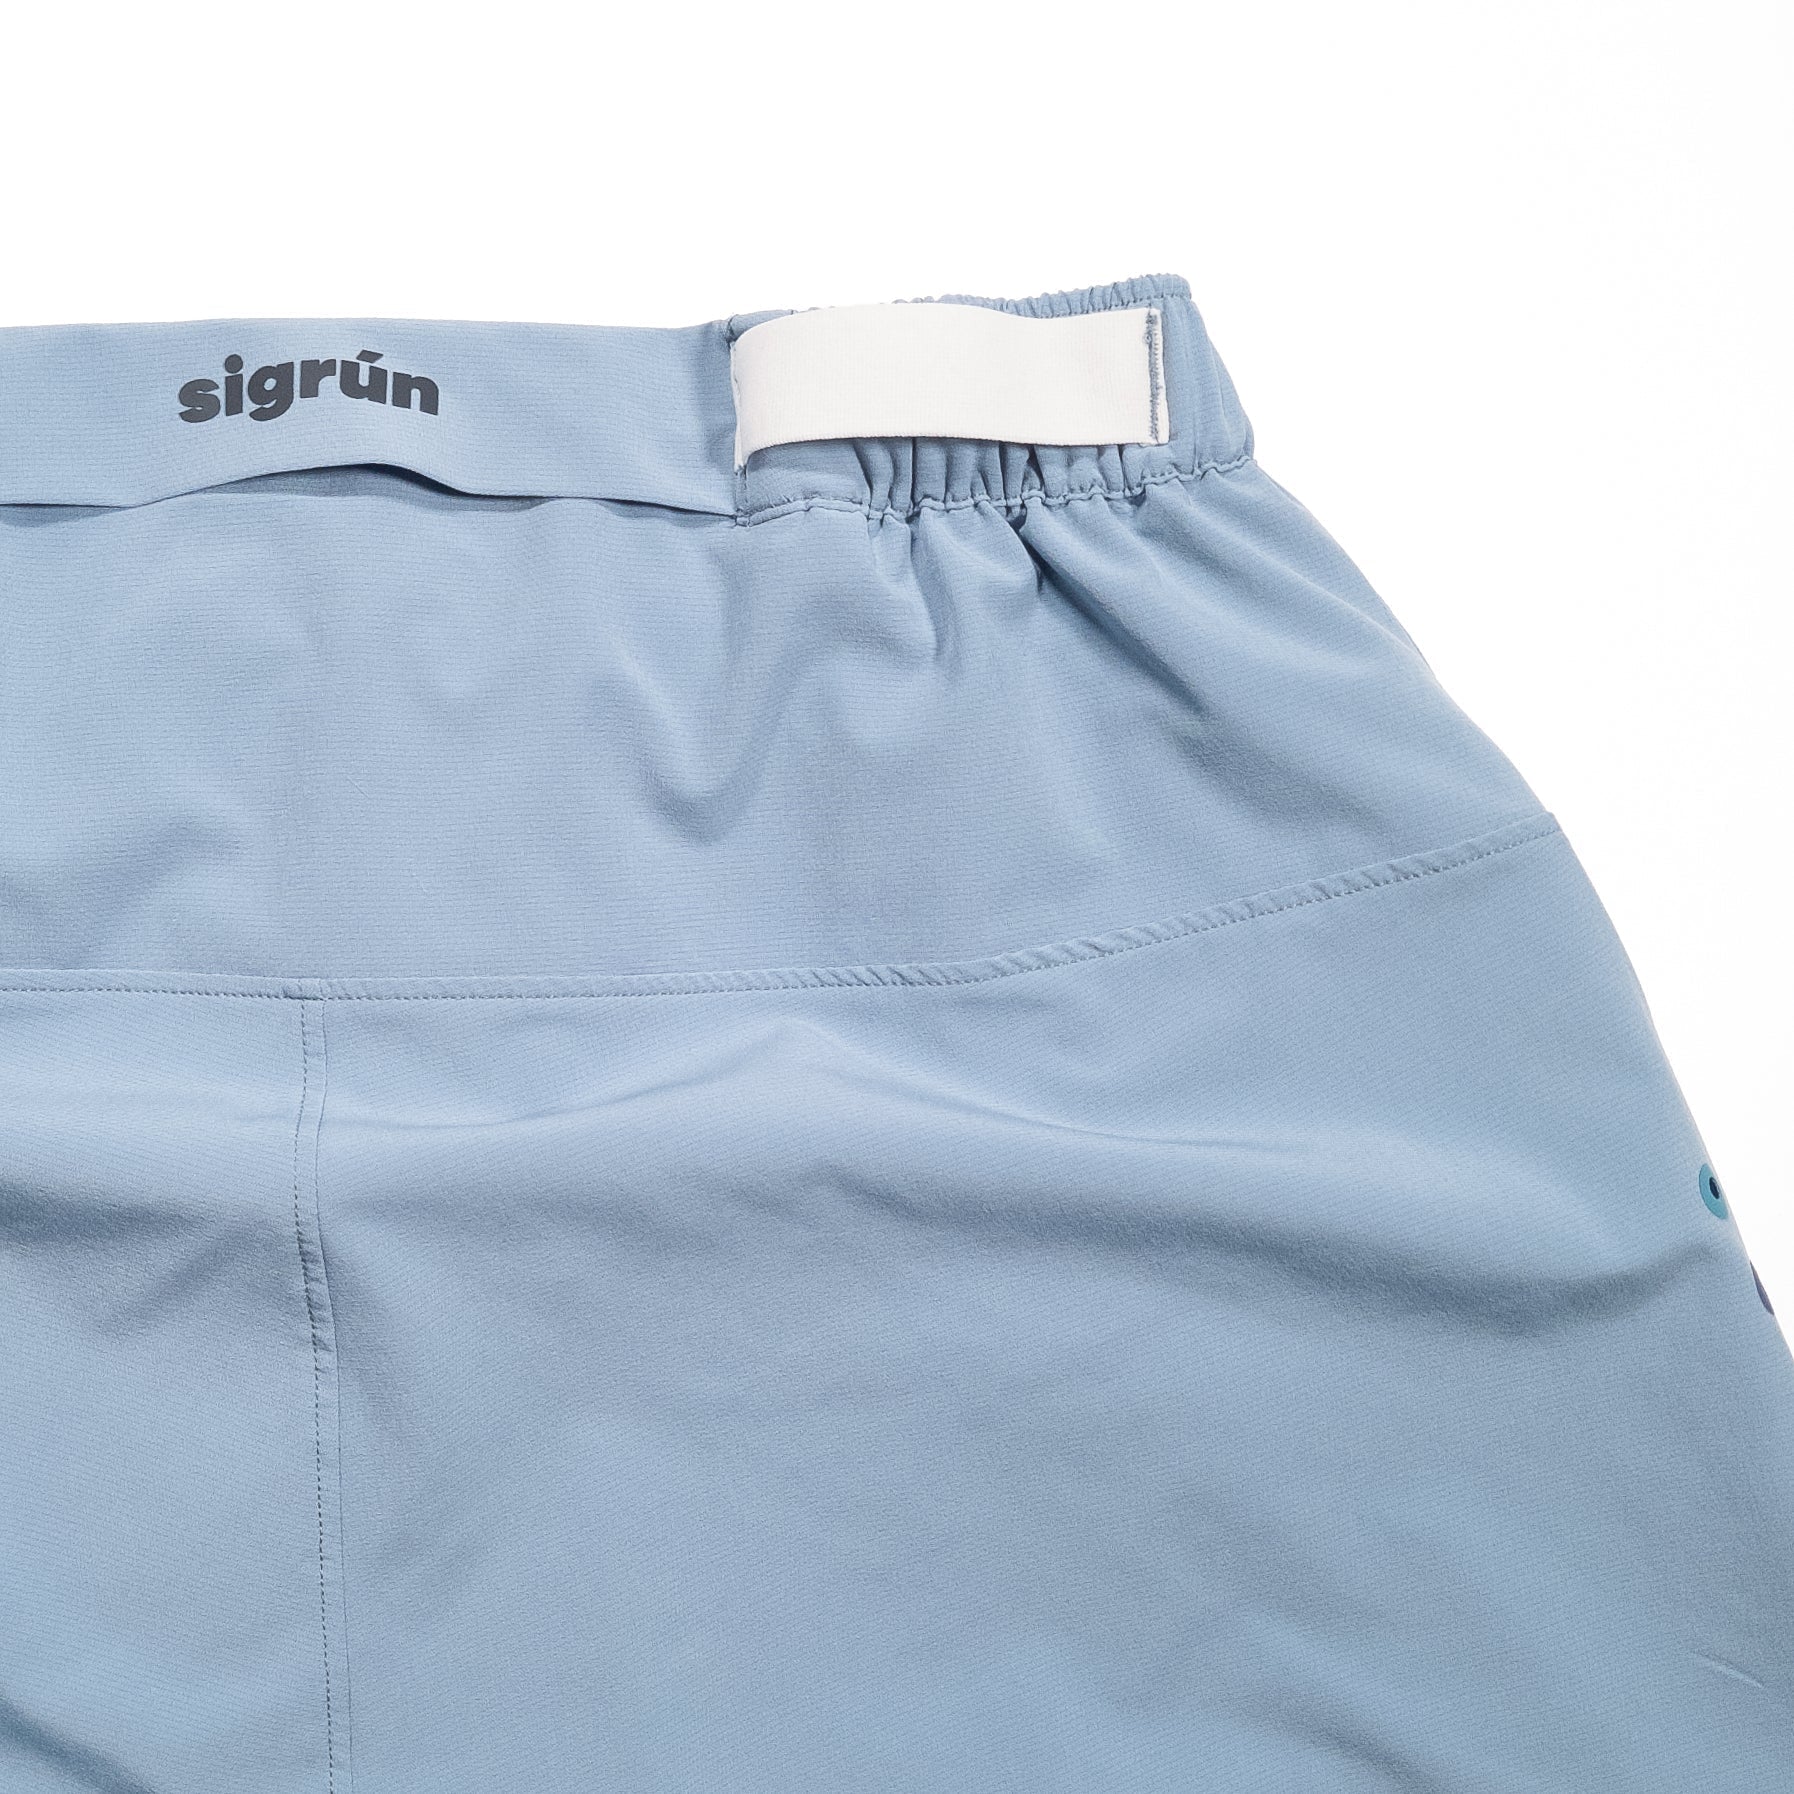 Match Shorts - 7" Inseam with Liner